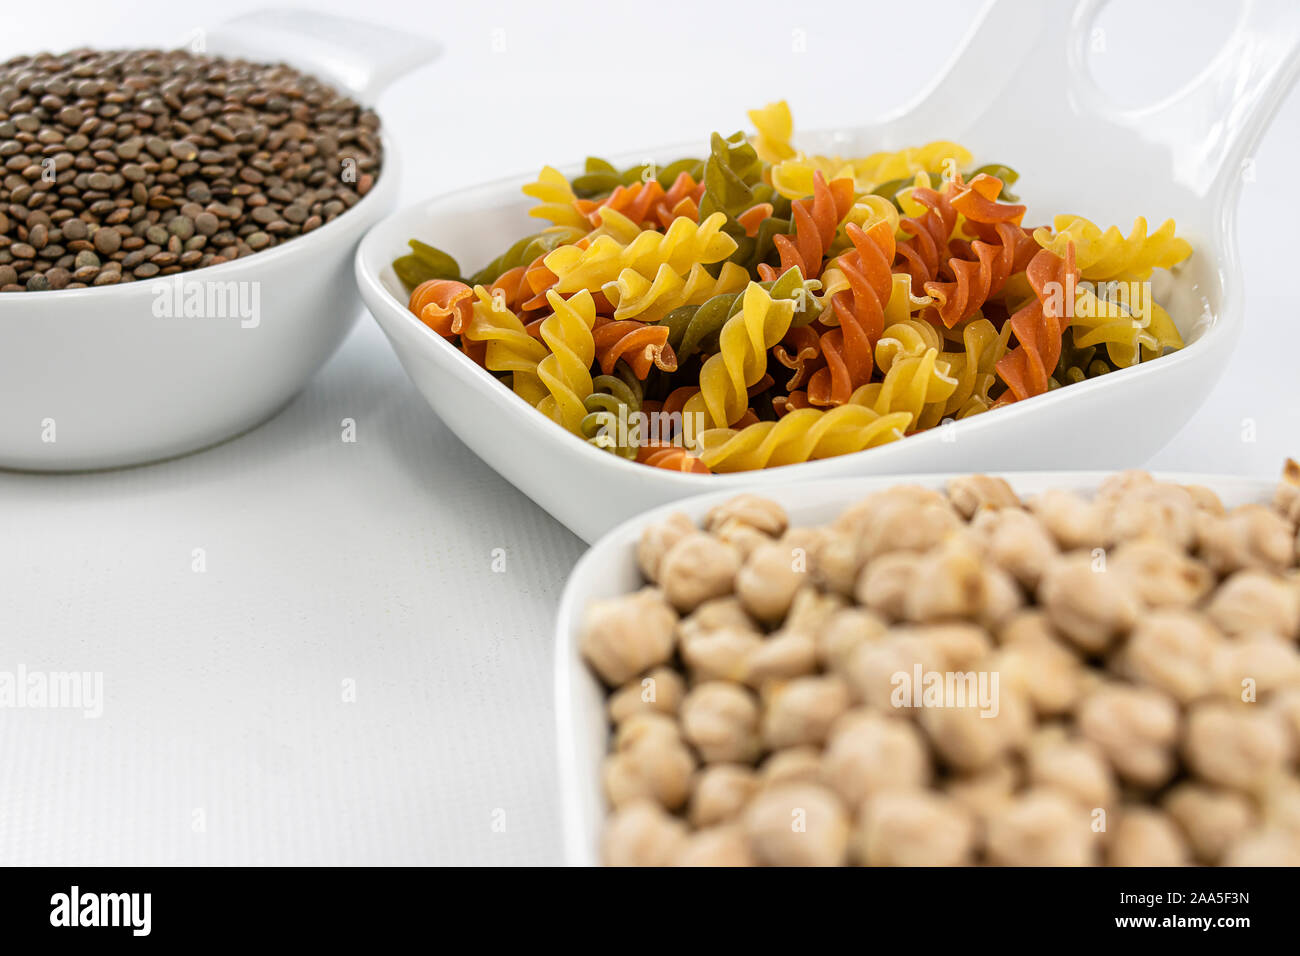 Close up view of colorful pasta, chickpeas and lentils in white bowls on white background Stock Photo